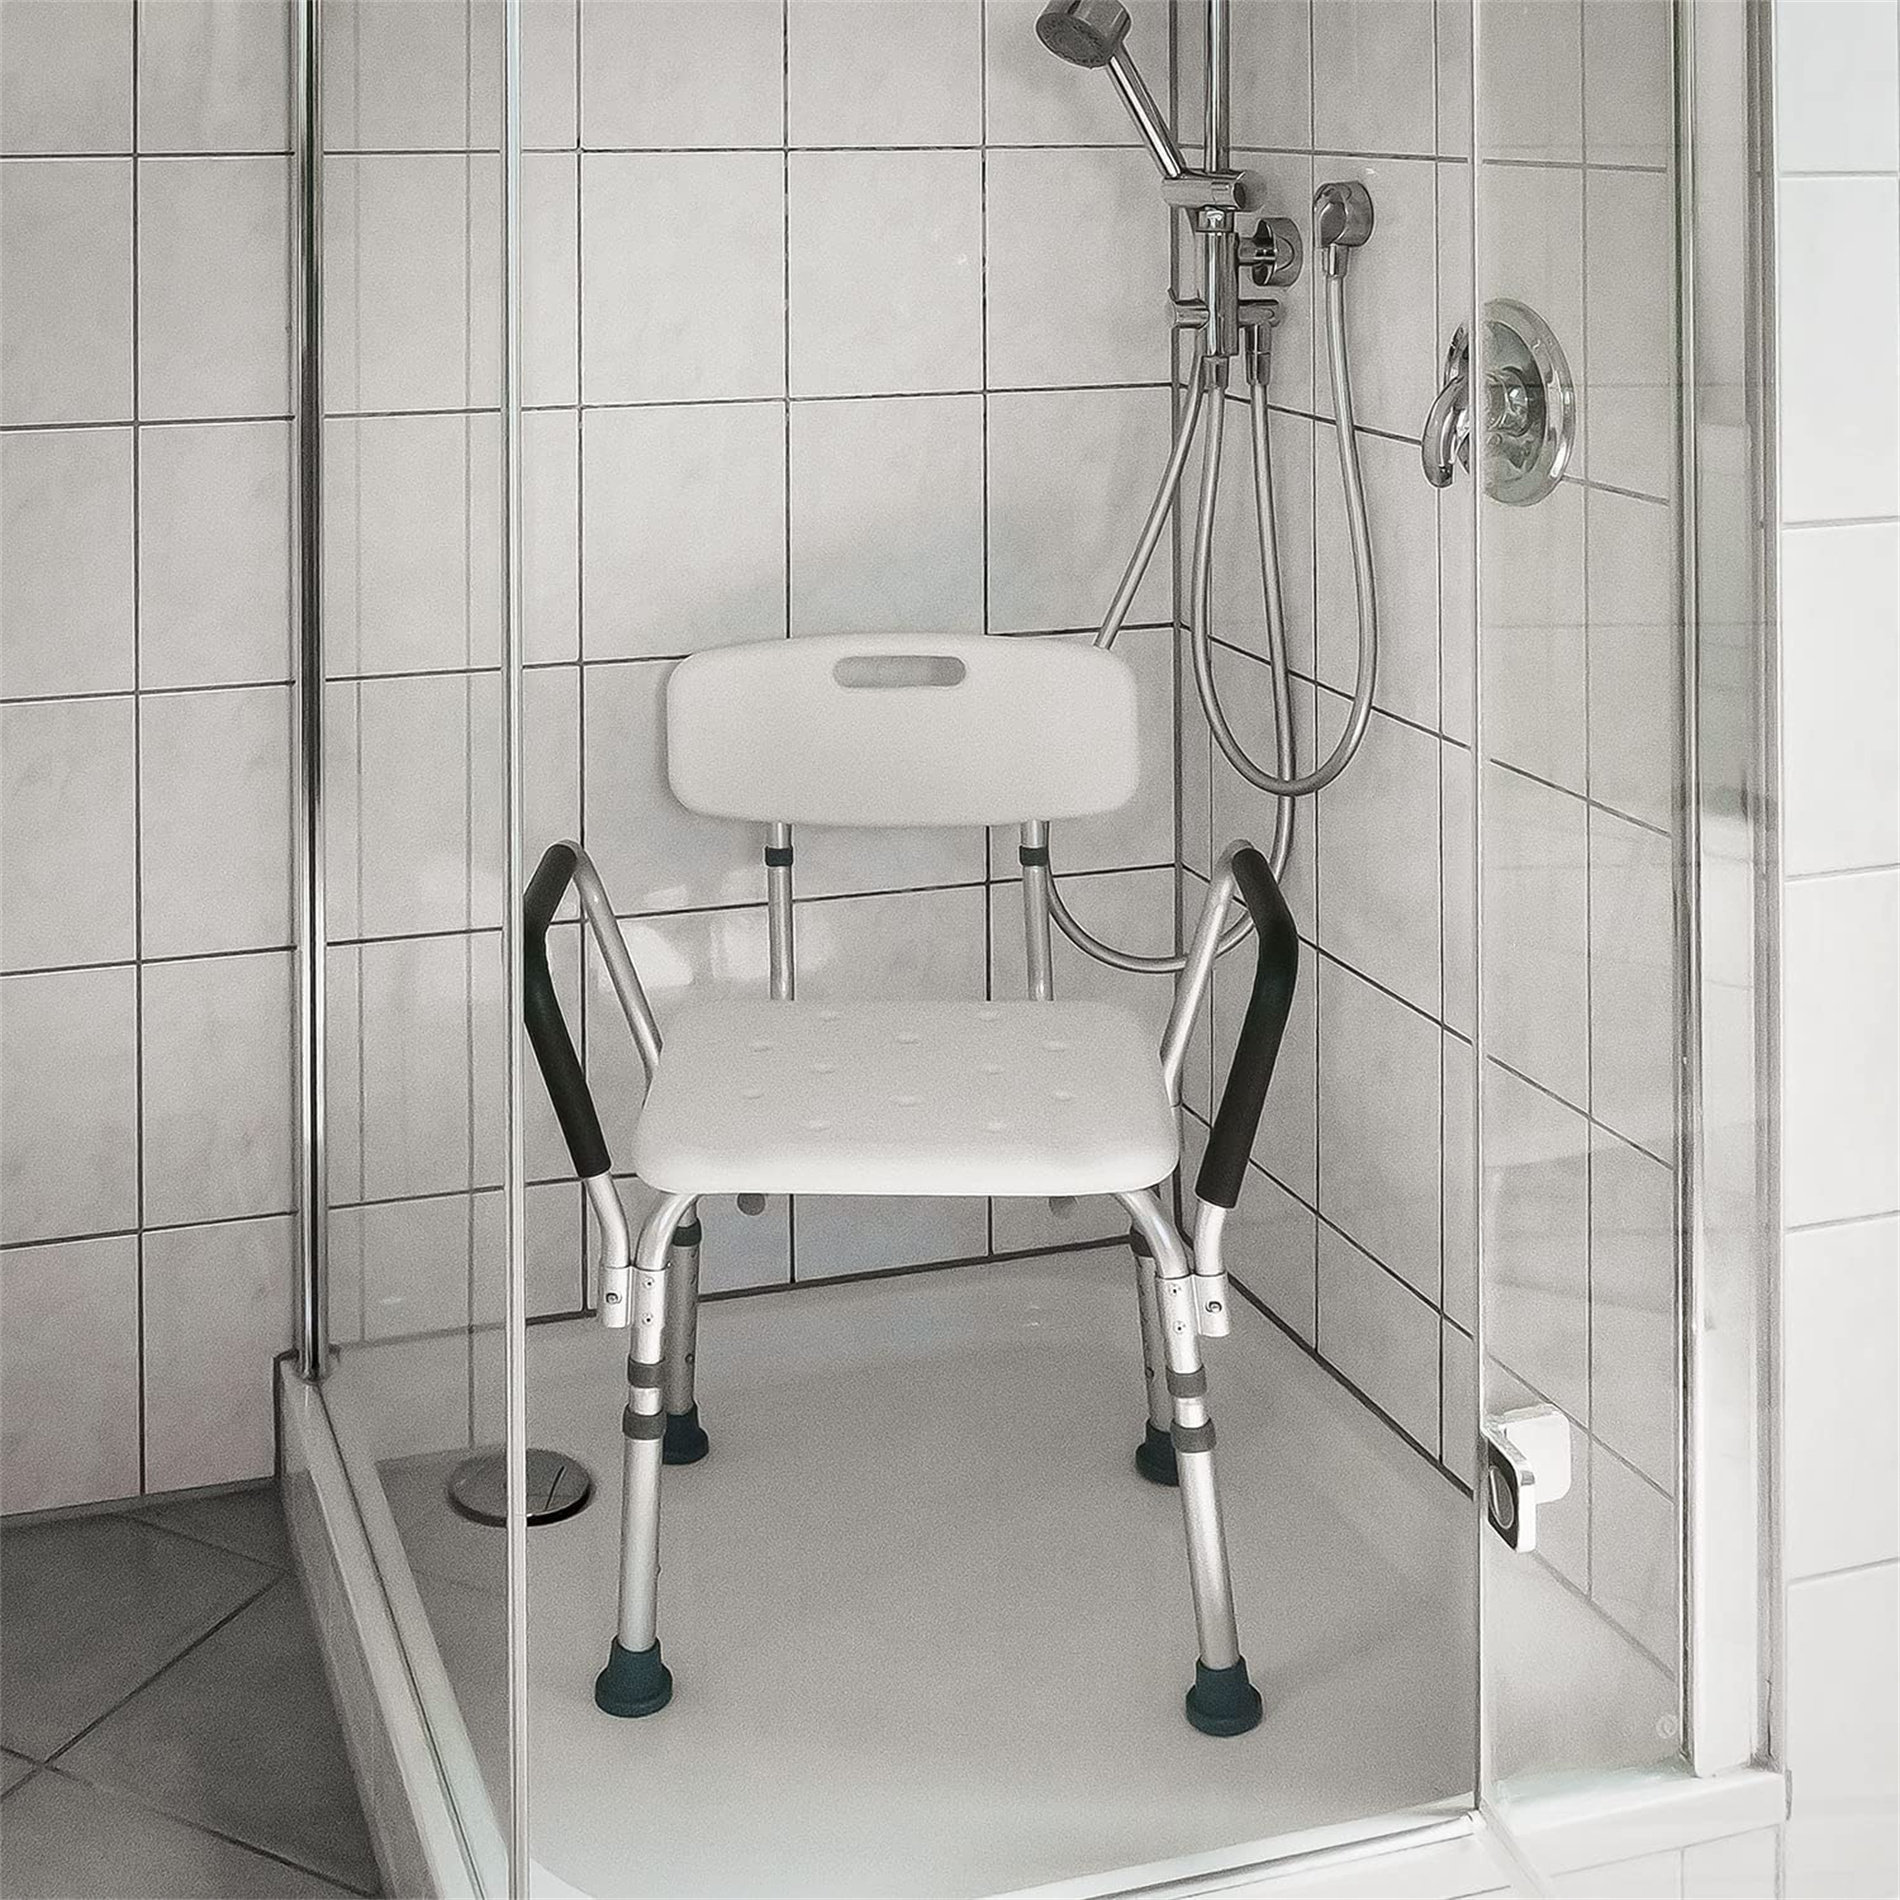 Levi Beer Cinambei Shower Chair Height Adjustable Tub Shower Bench